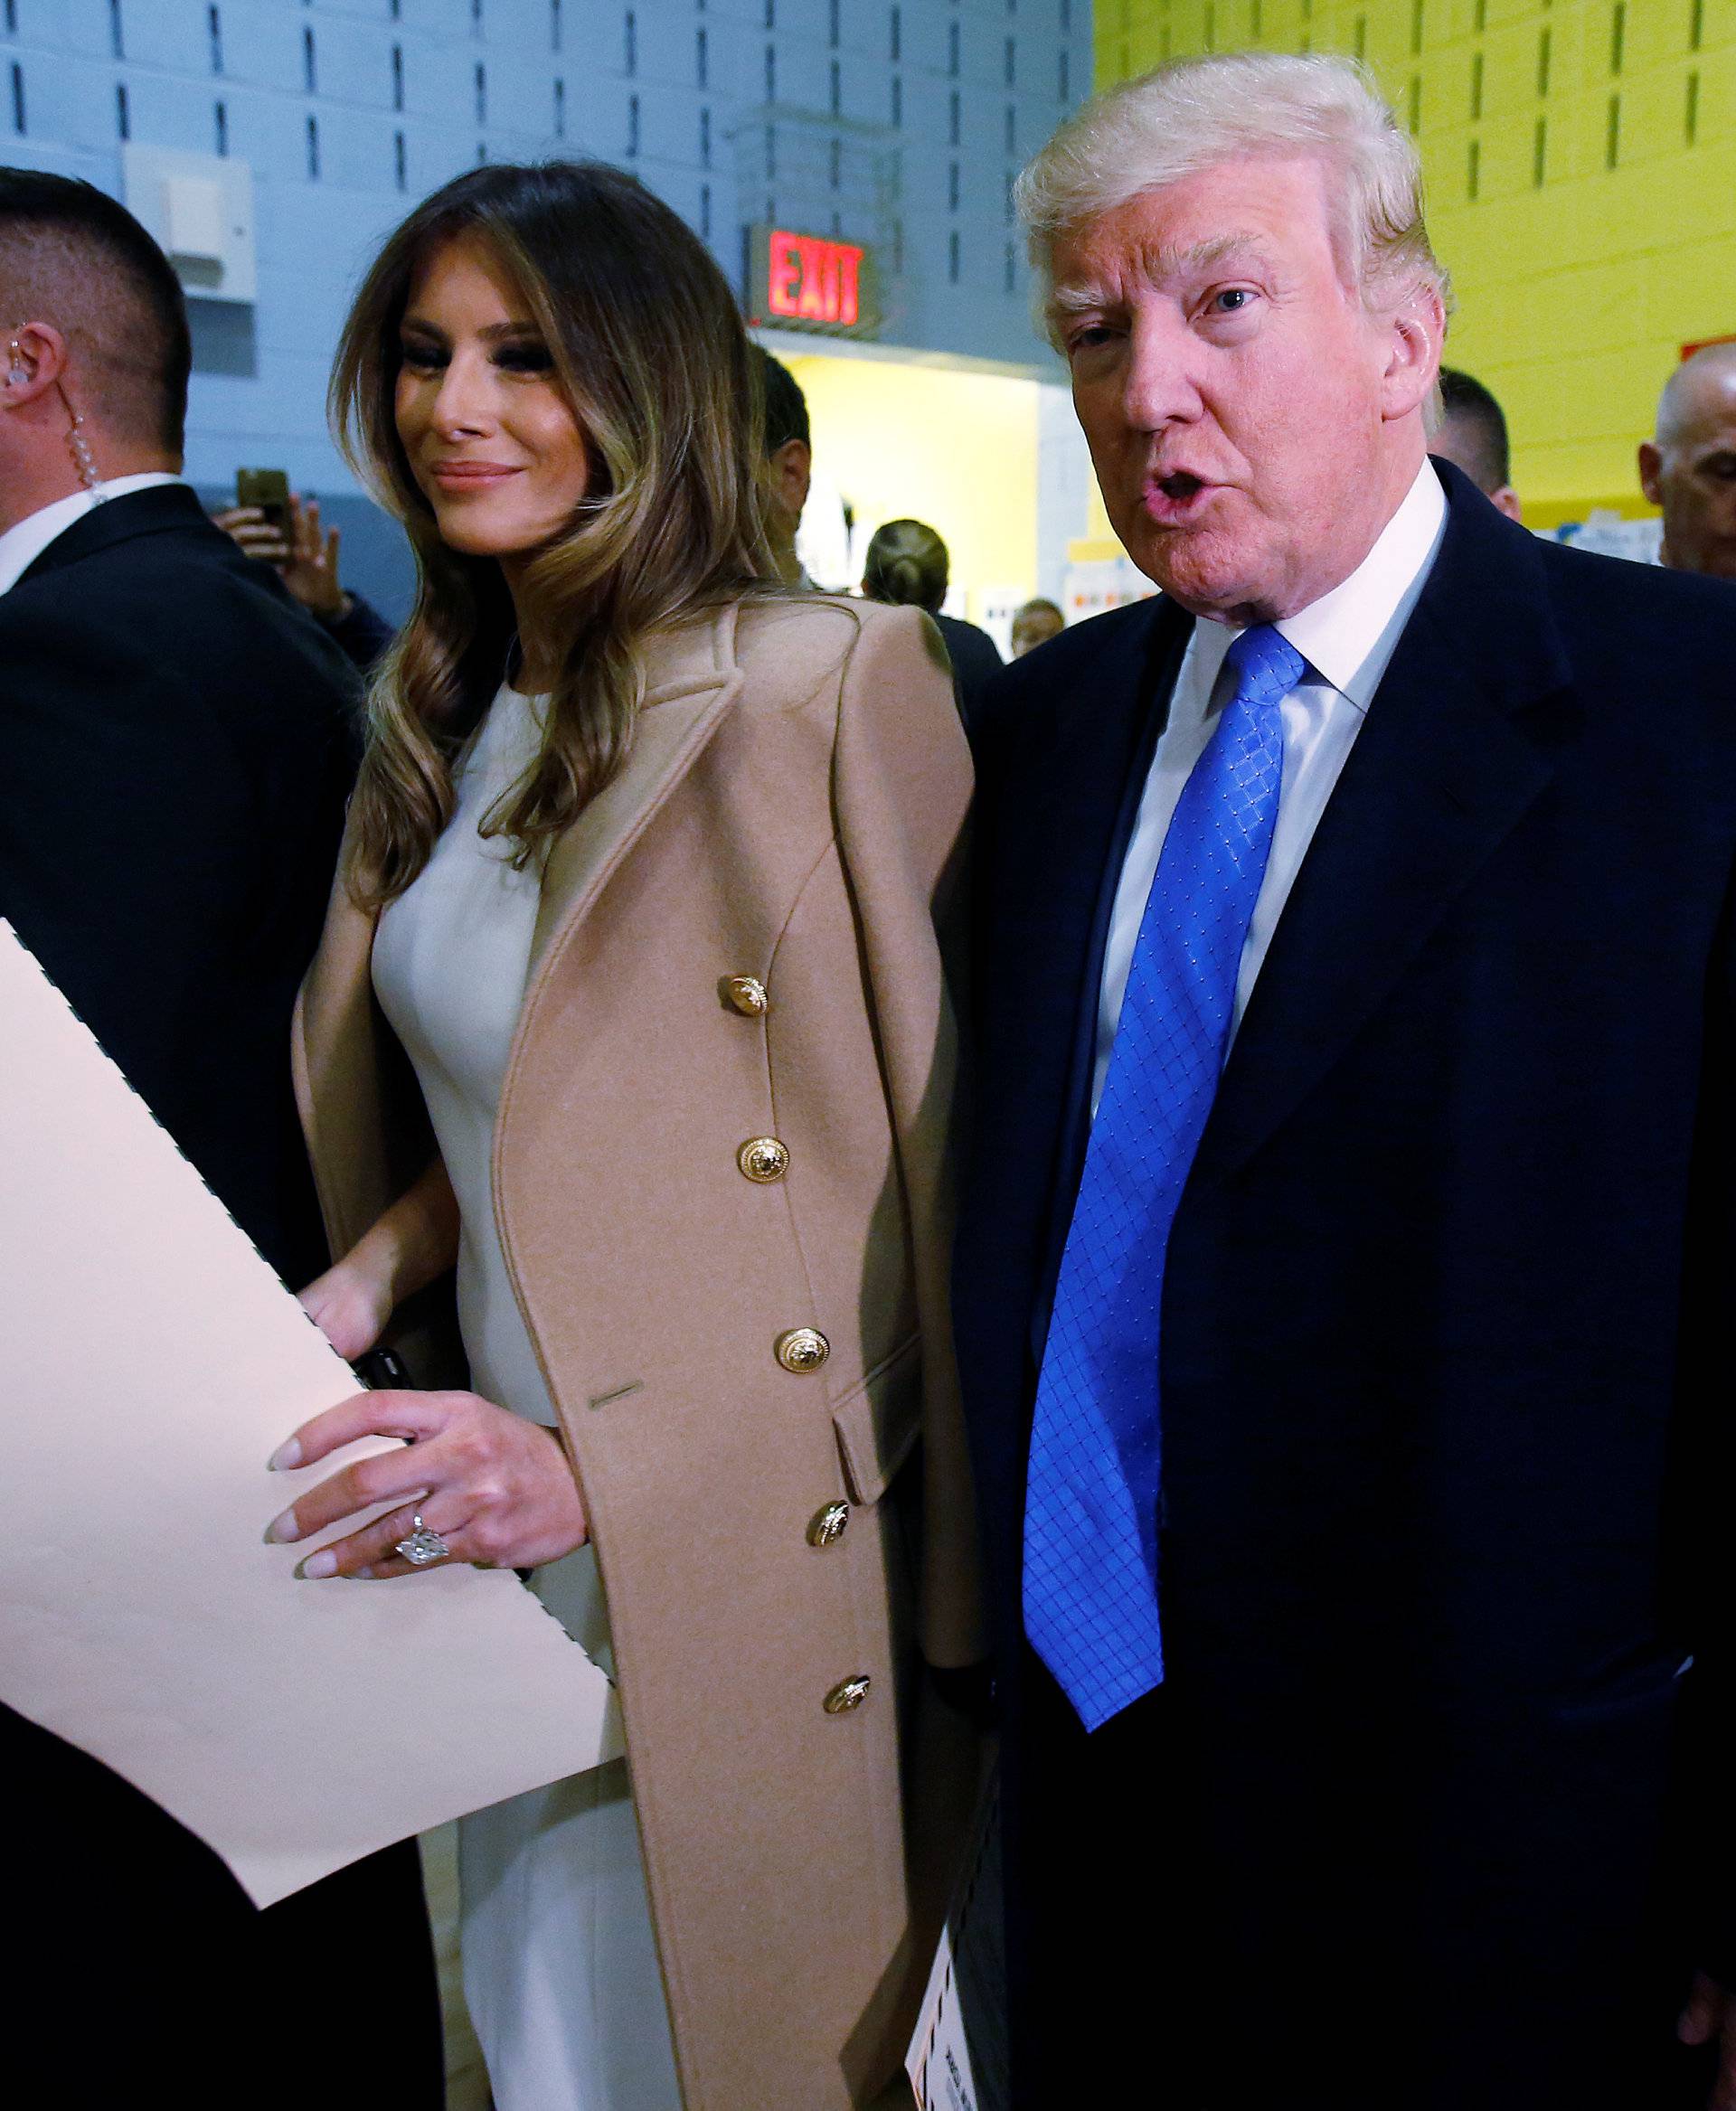 Republican presidential nominee Donald Trump and wife Melania Trump walk with their ballots to the scanner after voting at PS 59 in New York